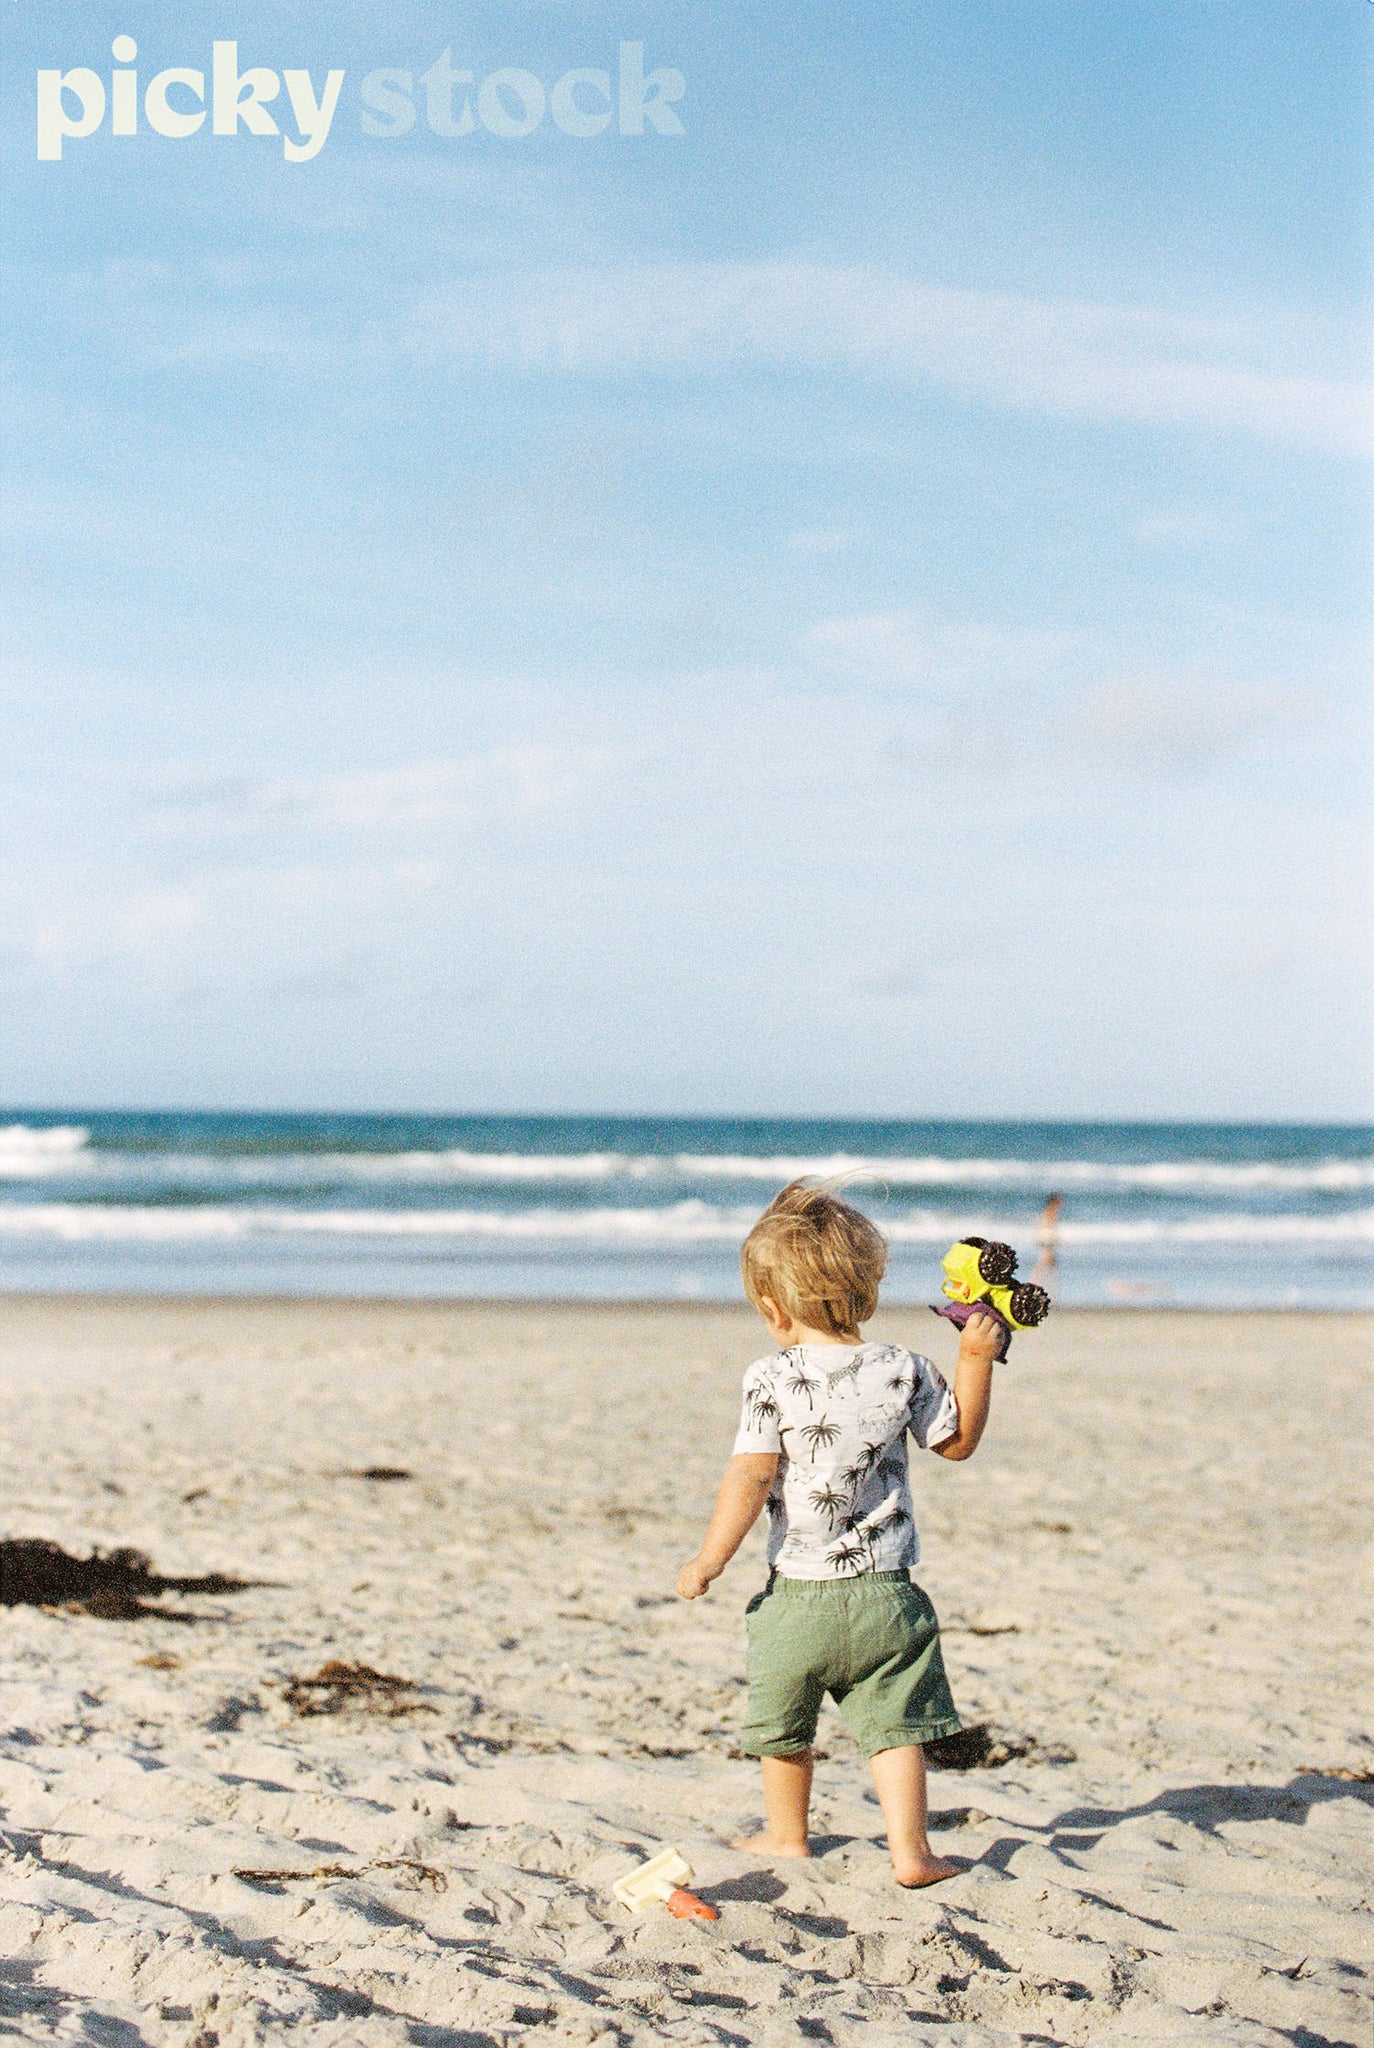 Portrait image of young blonde boy walking along golden sand beach. Holding small truck digger in right hand. Blue ocean with waves, and soft blue sky. Boy wearing green shorts with grey top